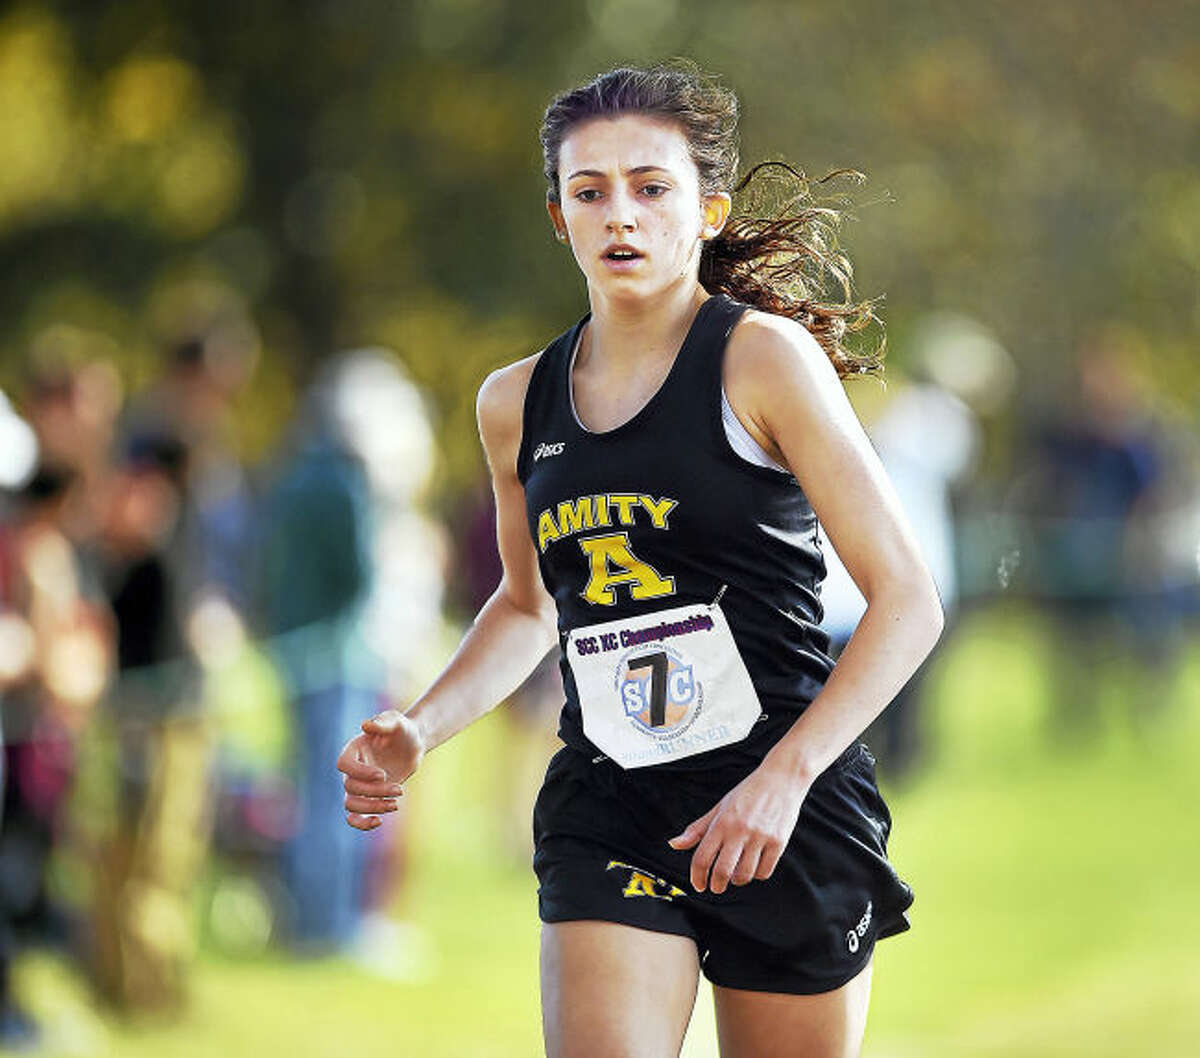 Amity senior Emily Criscuolo won the SCC girls’ cross country championship meet Thursday at East Shore Park in New Haven.